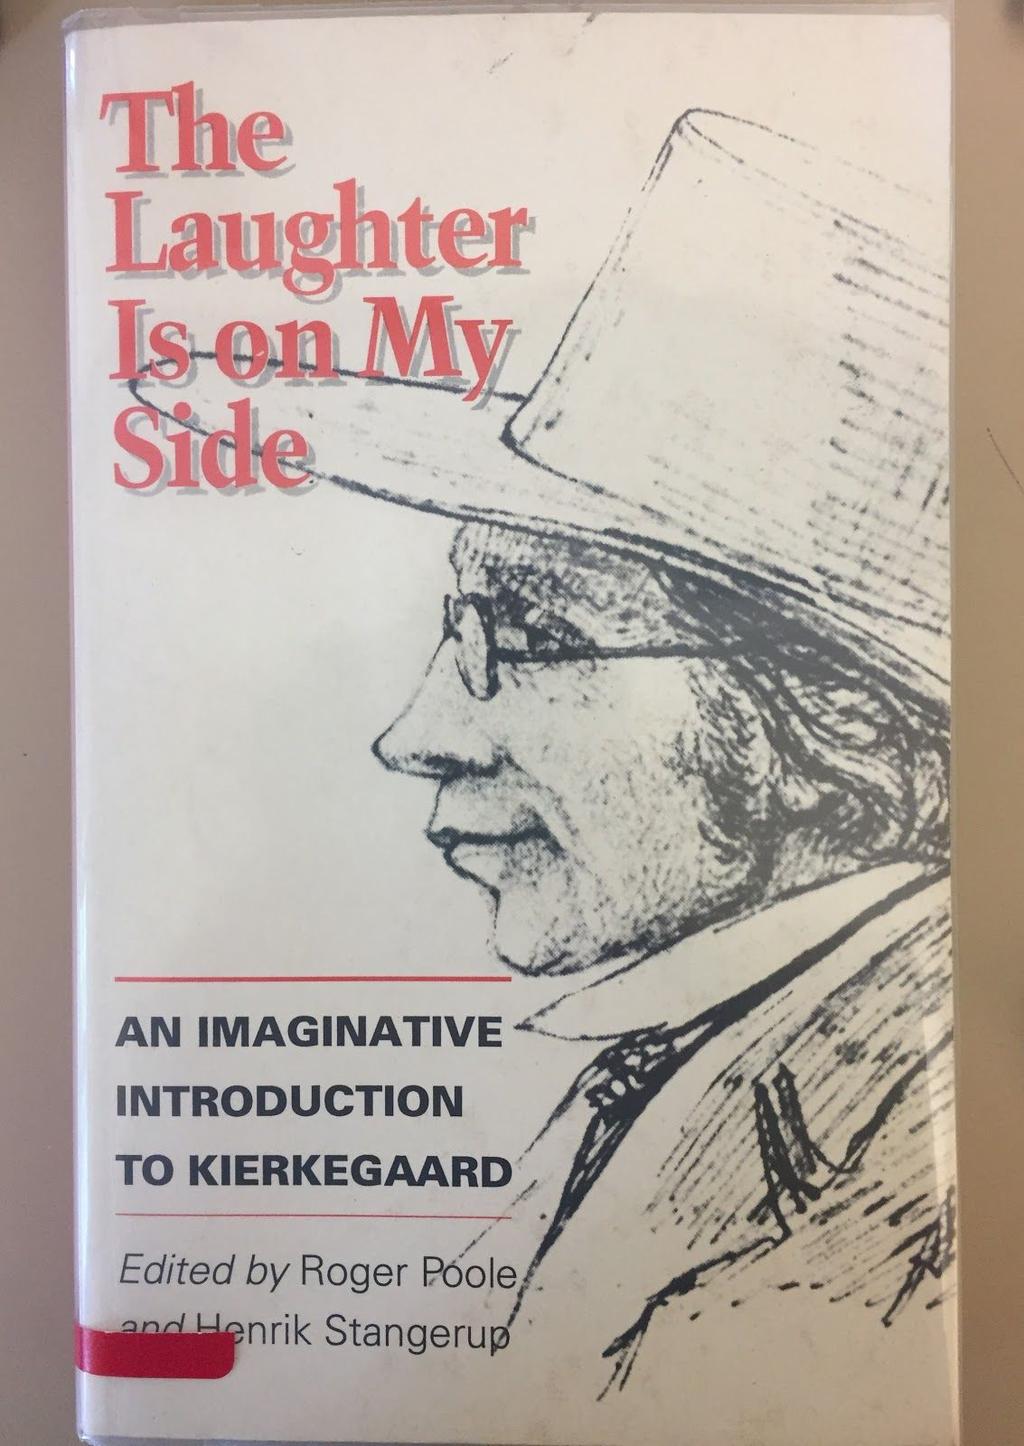 The Laughter Is on My Side: An Imaginative Introduction to Kierkegaard by Roger Poole and Hendrik Stangerup Here is an engaging and enjoyable alternative to the more solemn introductions to Søren